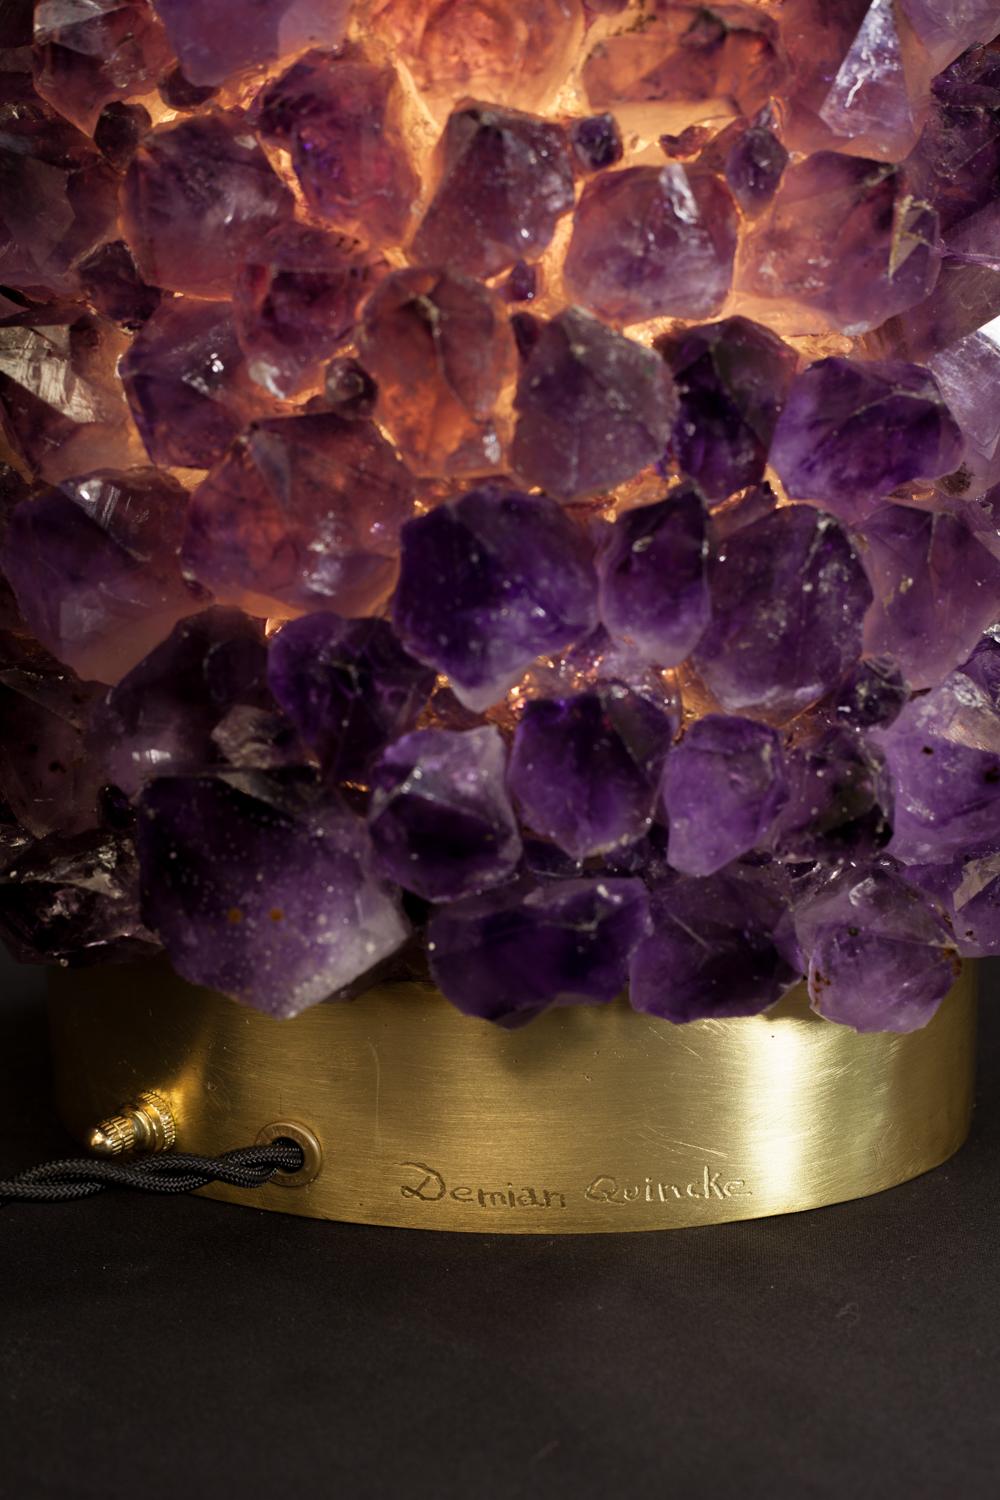 Pair of natural amethyst table lamps-signed by Demian Quincke
Aurea natural amethyst assembled and sculpted on casted oval brass base
Dimensions: 45 x 27 x 17 cm.

5W LED light
Bi-Volt 100-240V 38A and 8ft long black twisted 18 Gauge / SPT-2